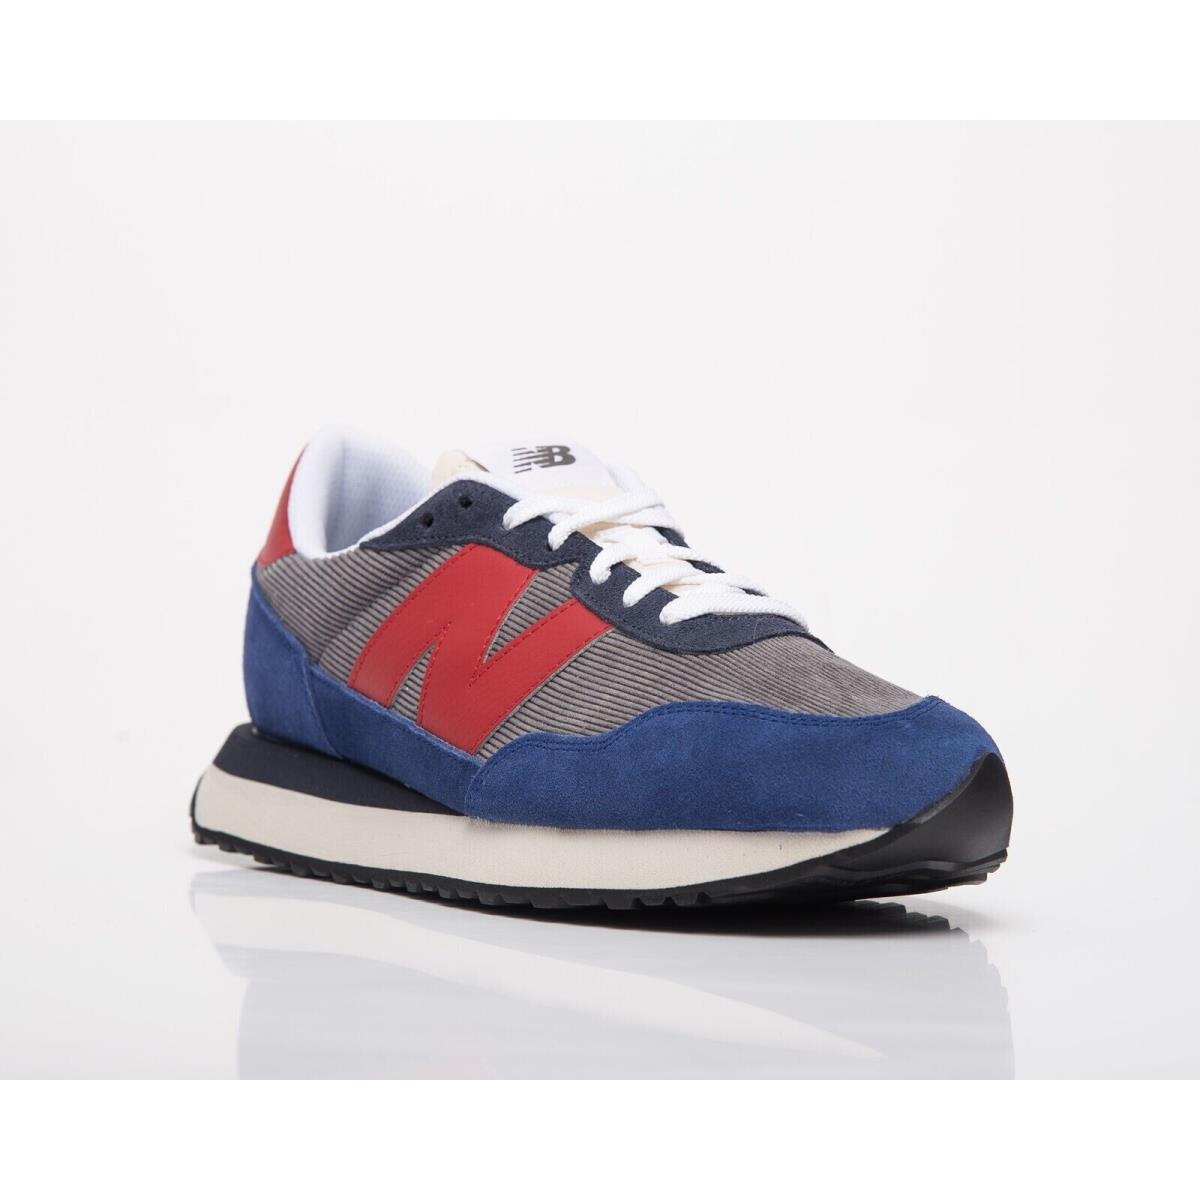 New Balance 237 Men`s Shoes - Navy/red - Size 10.5